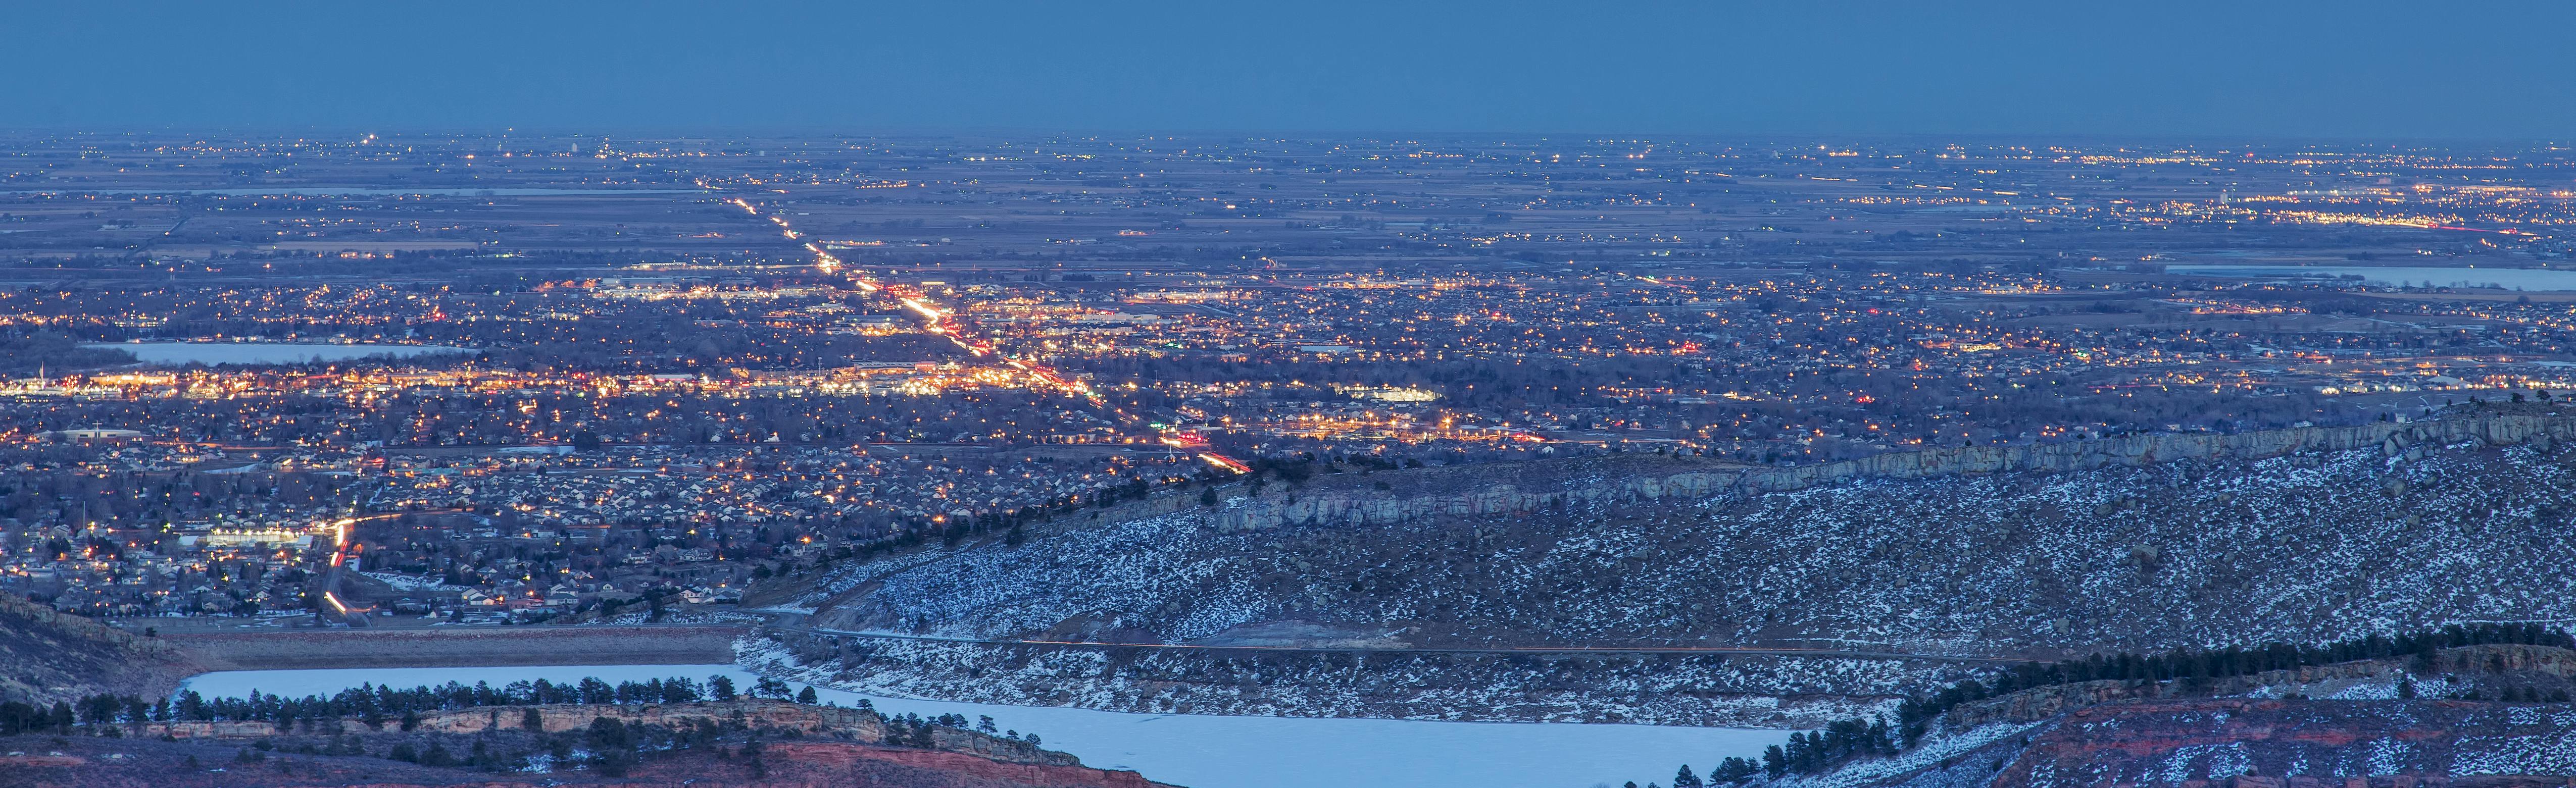 Aerial view of Fort Collins looking east over Horsetooth Reservoir and the city